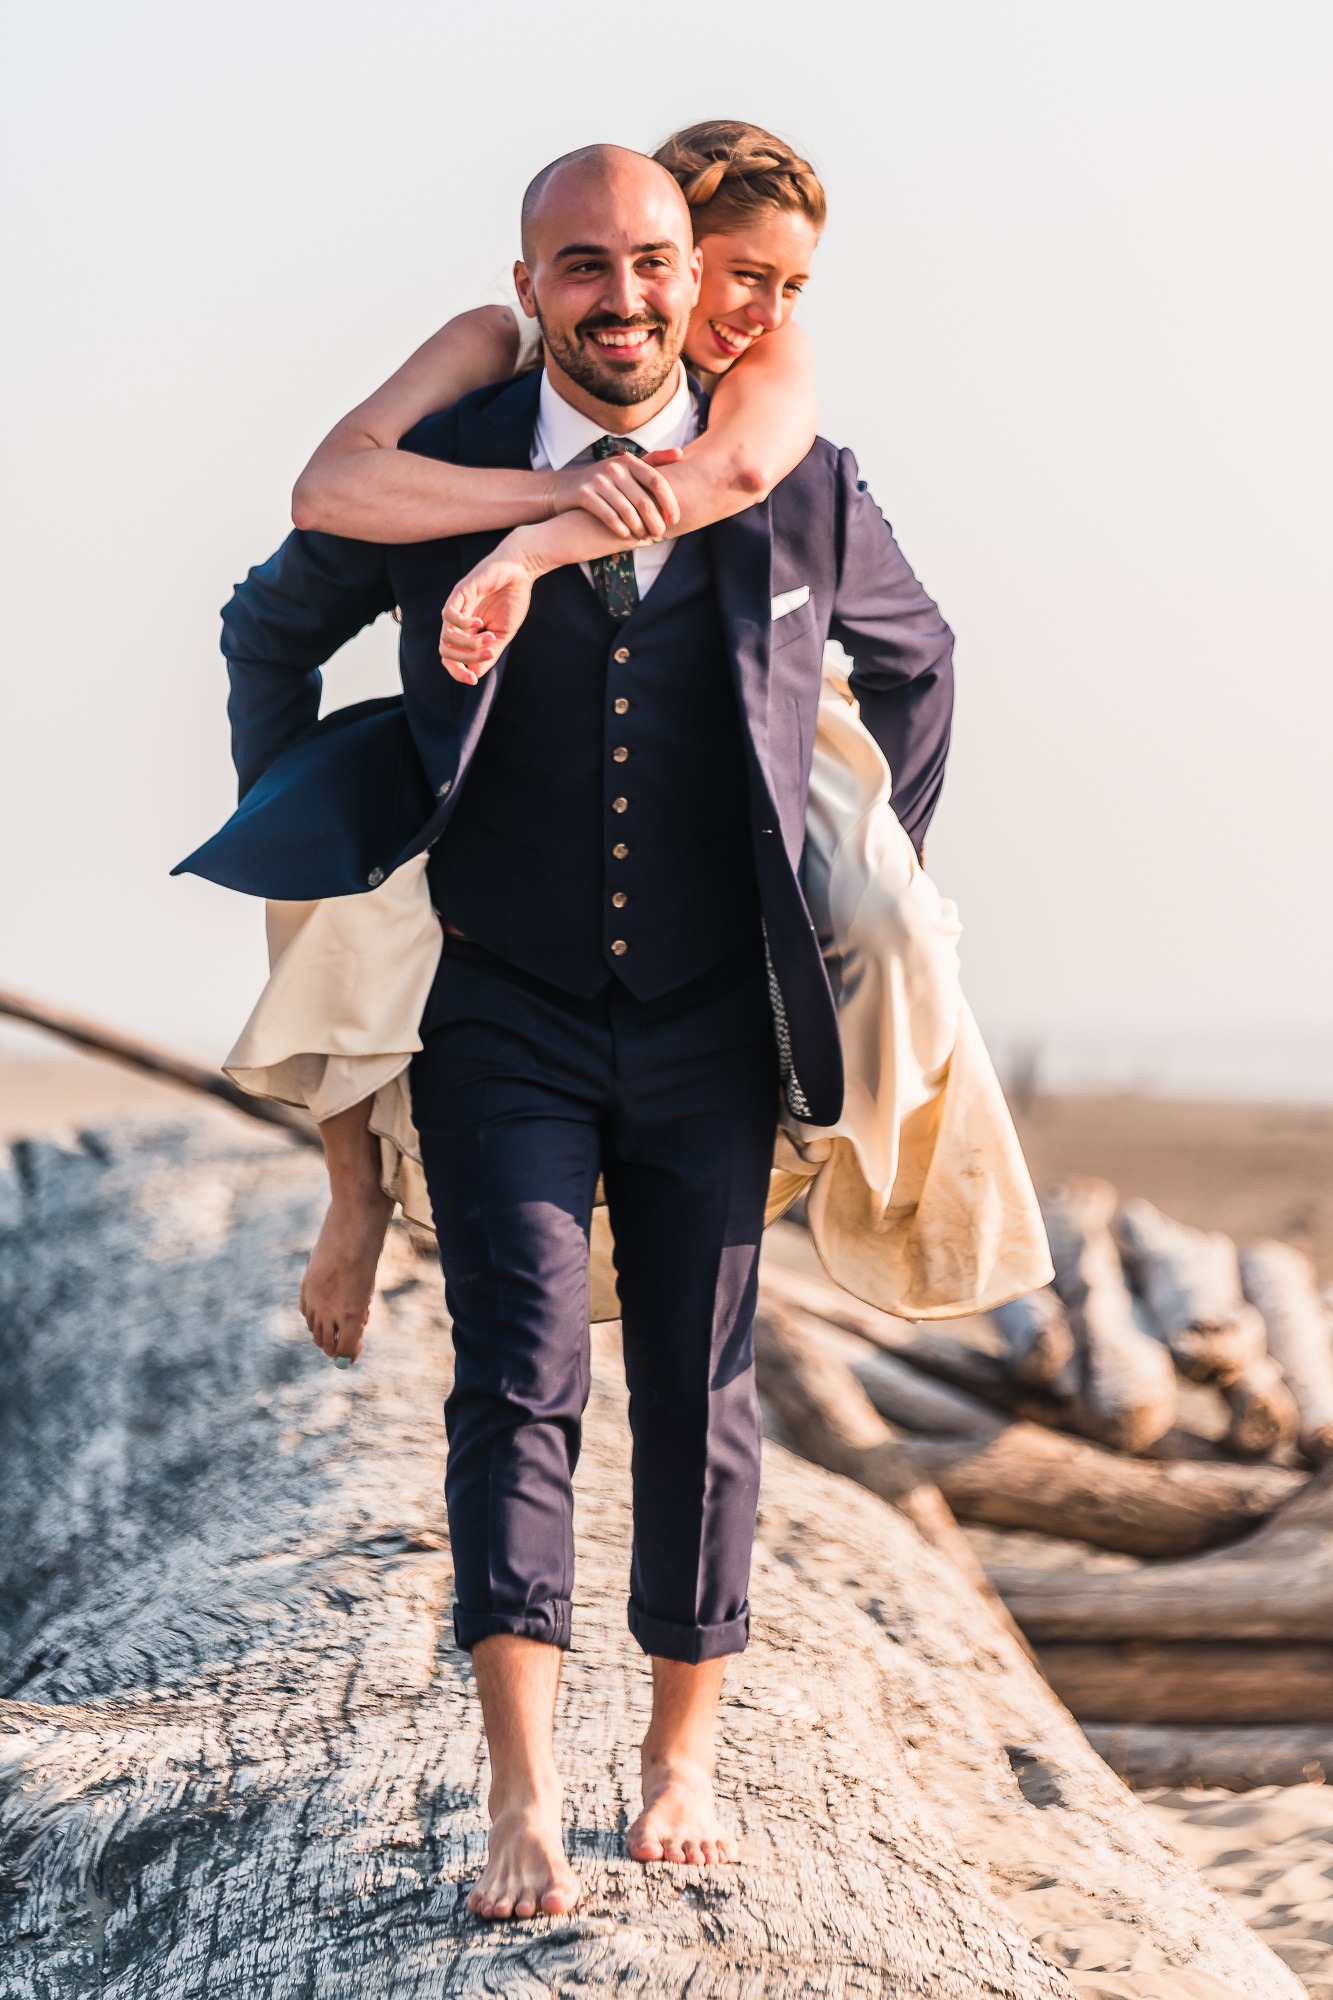 Olympic National Park wedding. As they play on the beach to celebrate their elopement, the groom gives his new wife a piggy back along a giant washed up log.